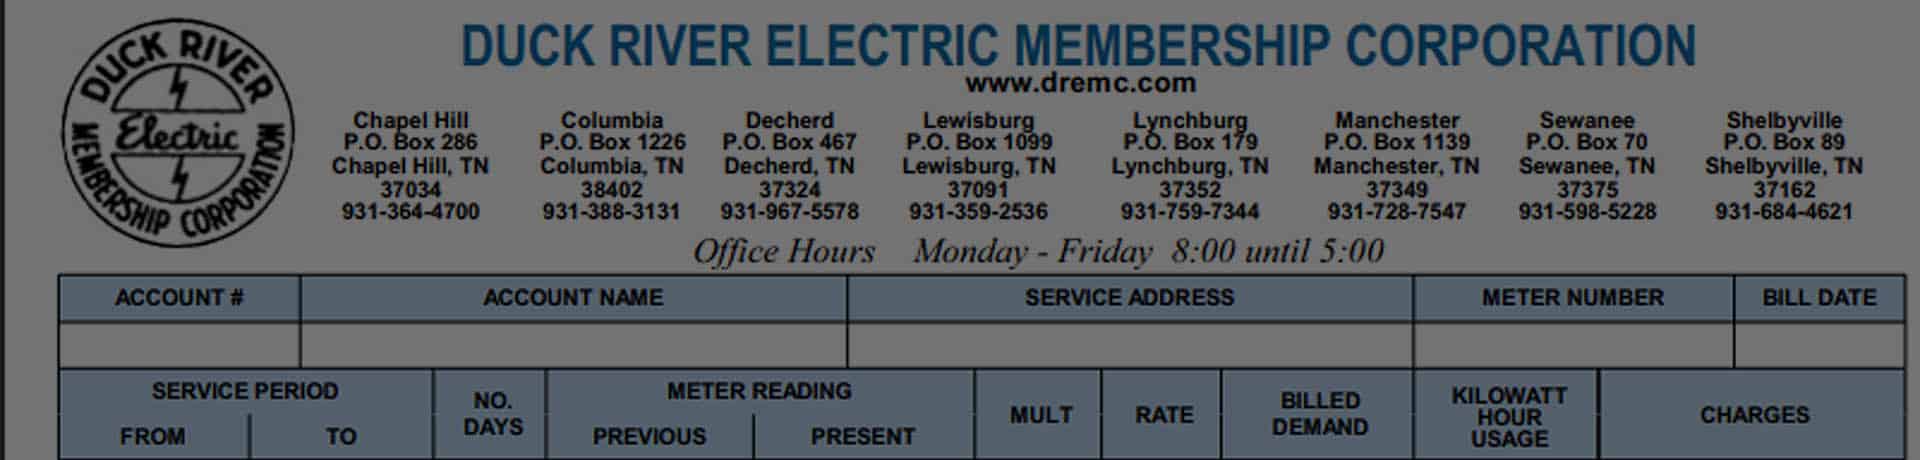 duck river electric bill pay